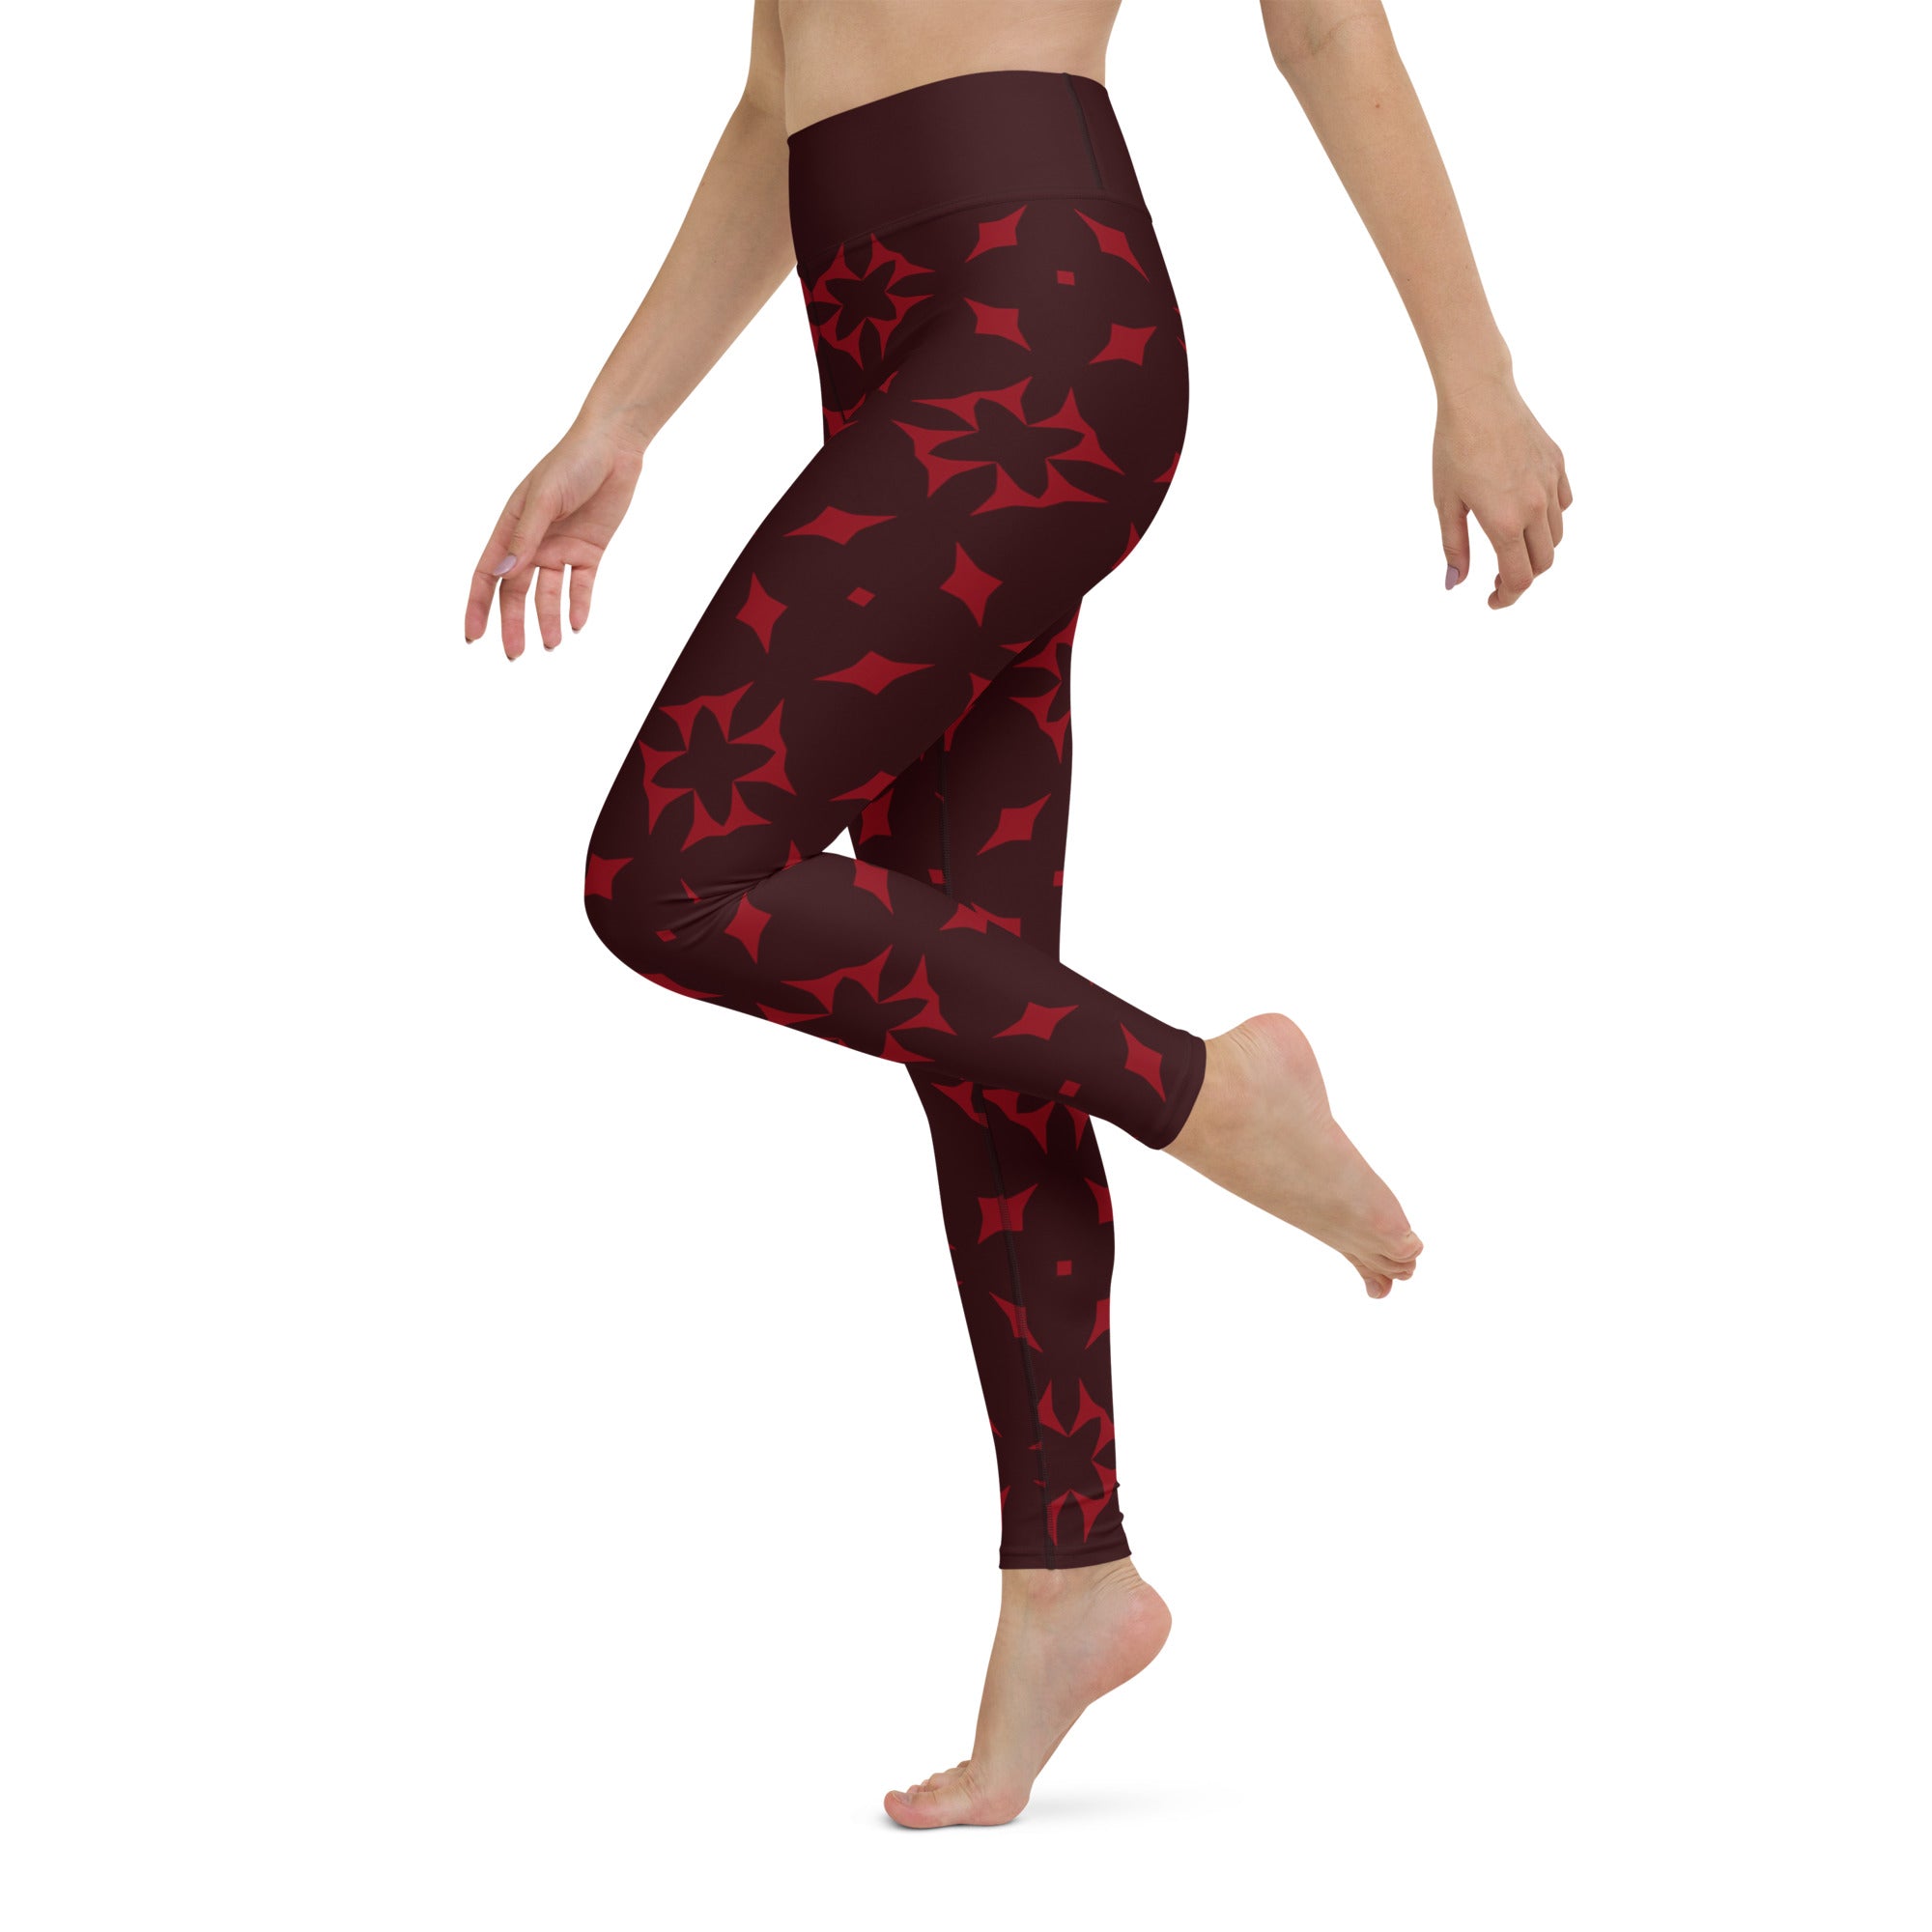 Durable and soft Mystic Moonlight Yoga Leggings perfect for any workout.